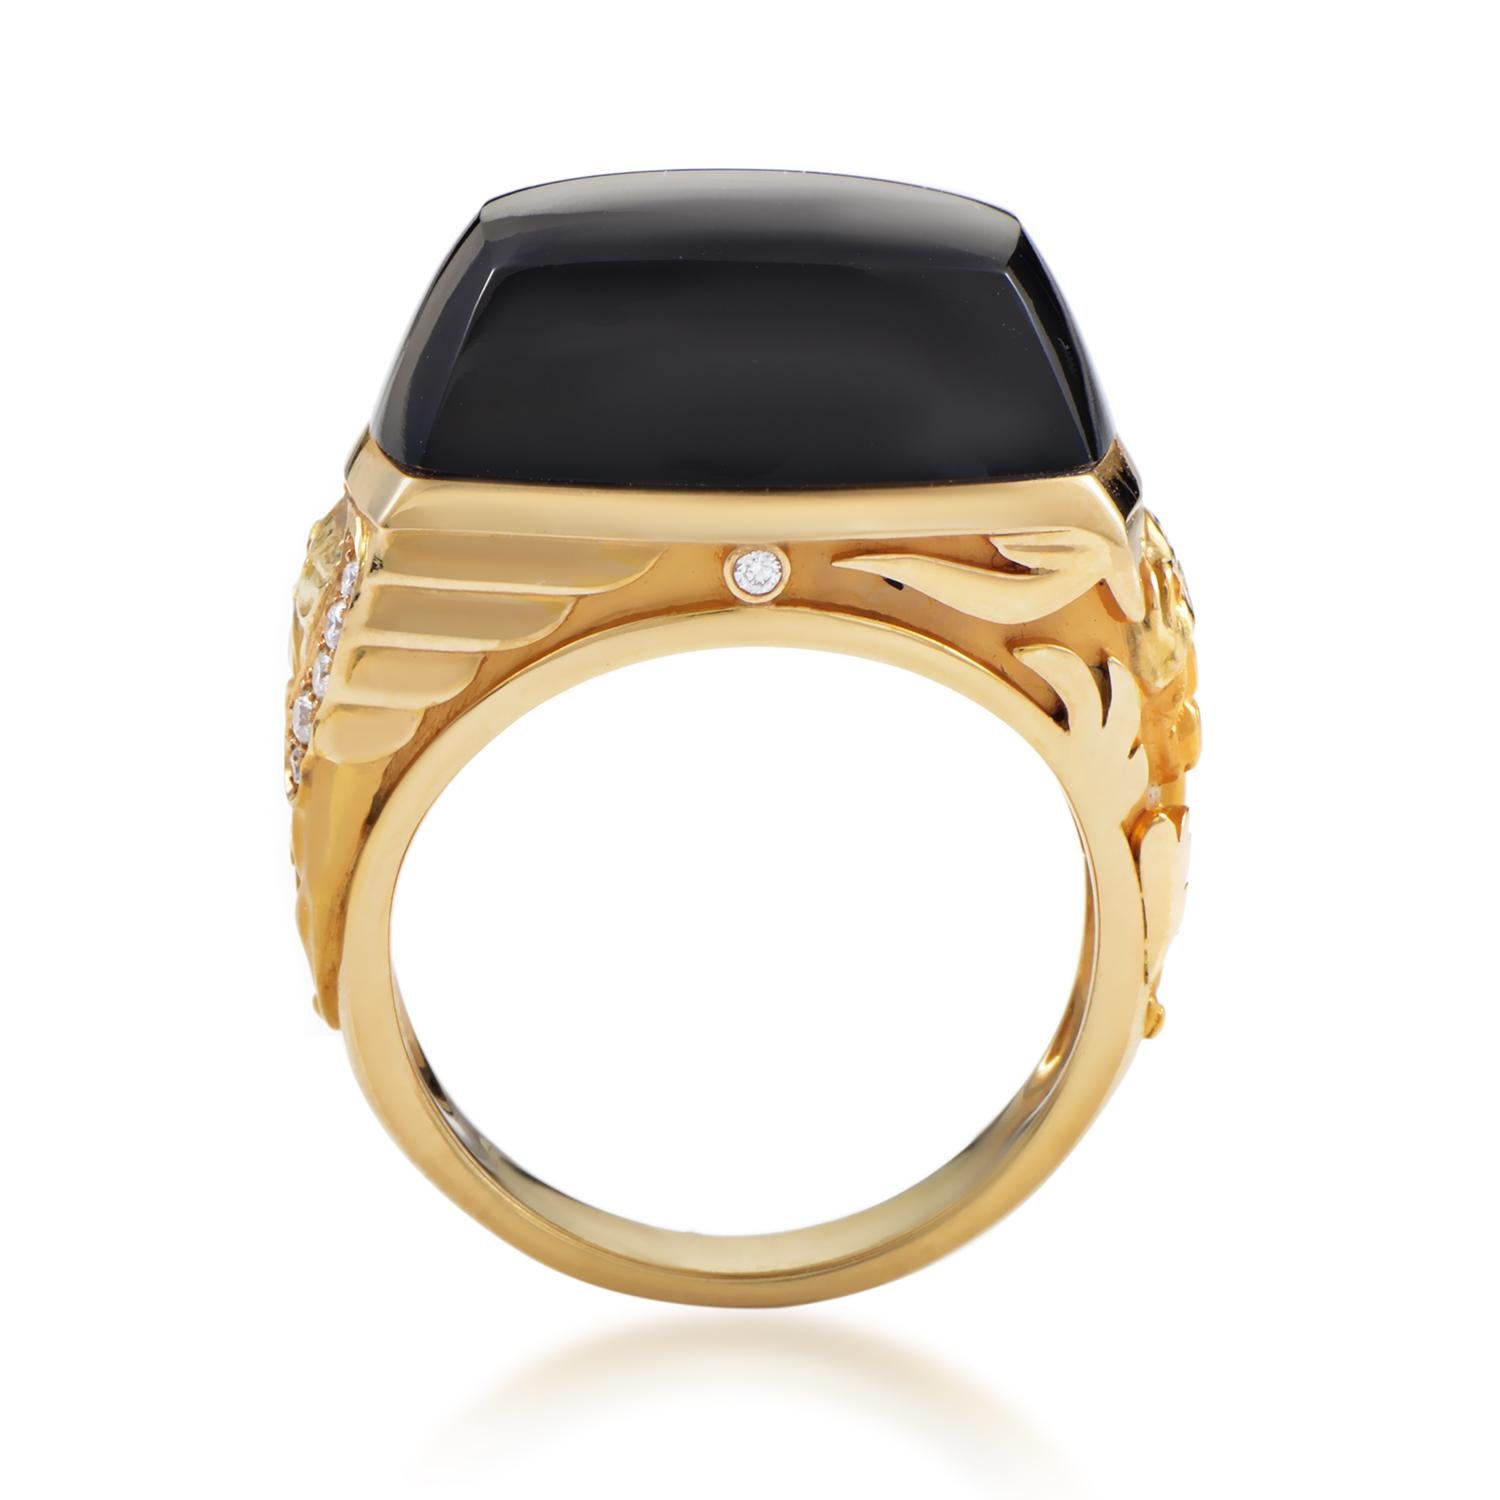 Producing a fantastic eye-catching effect through sheer innate appeal of the onyx stone weighing 2.82 carats as well as the classic luxurious combination of ornamented 18K yellow gold and lustrous diamonds totaling 0.11ct, Magerit present this